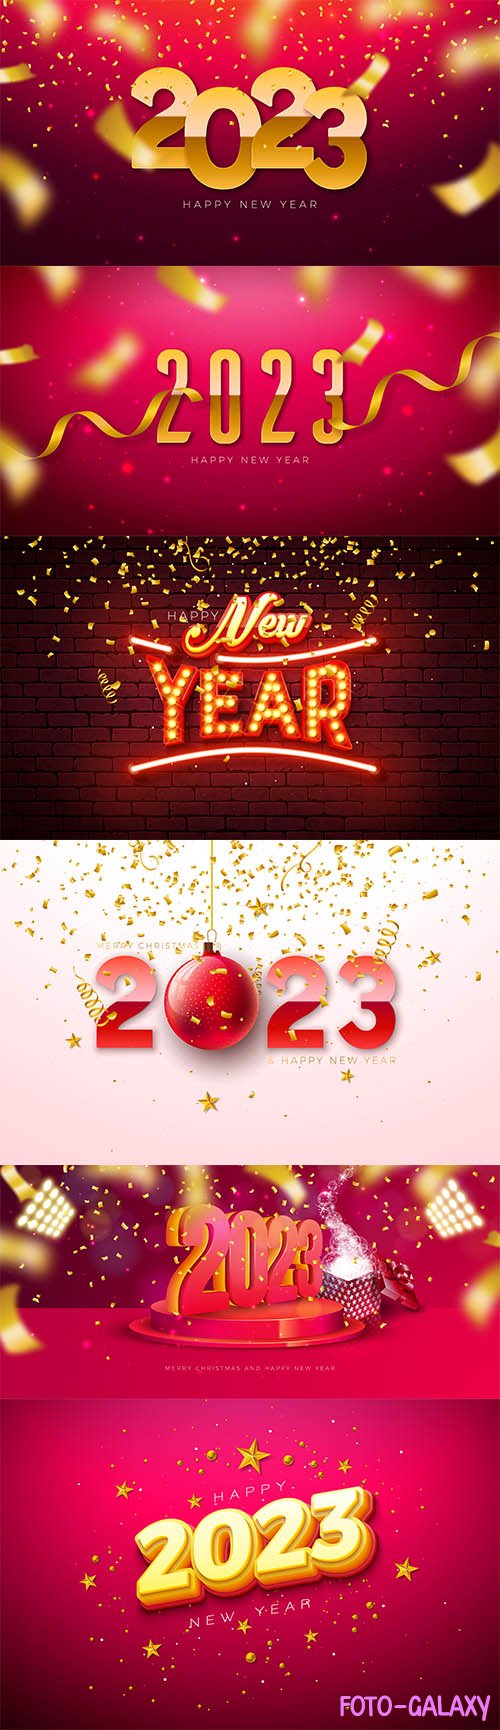 Happy new year 2023 illustration with glowing light bulb number and gold star